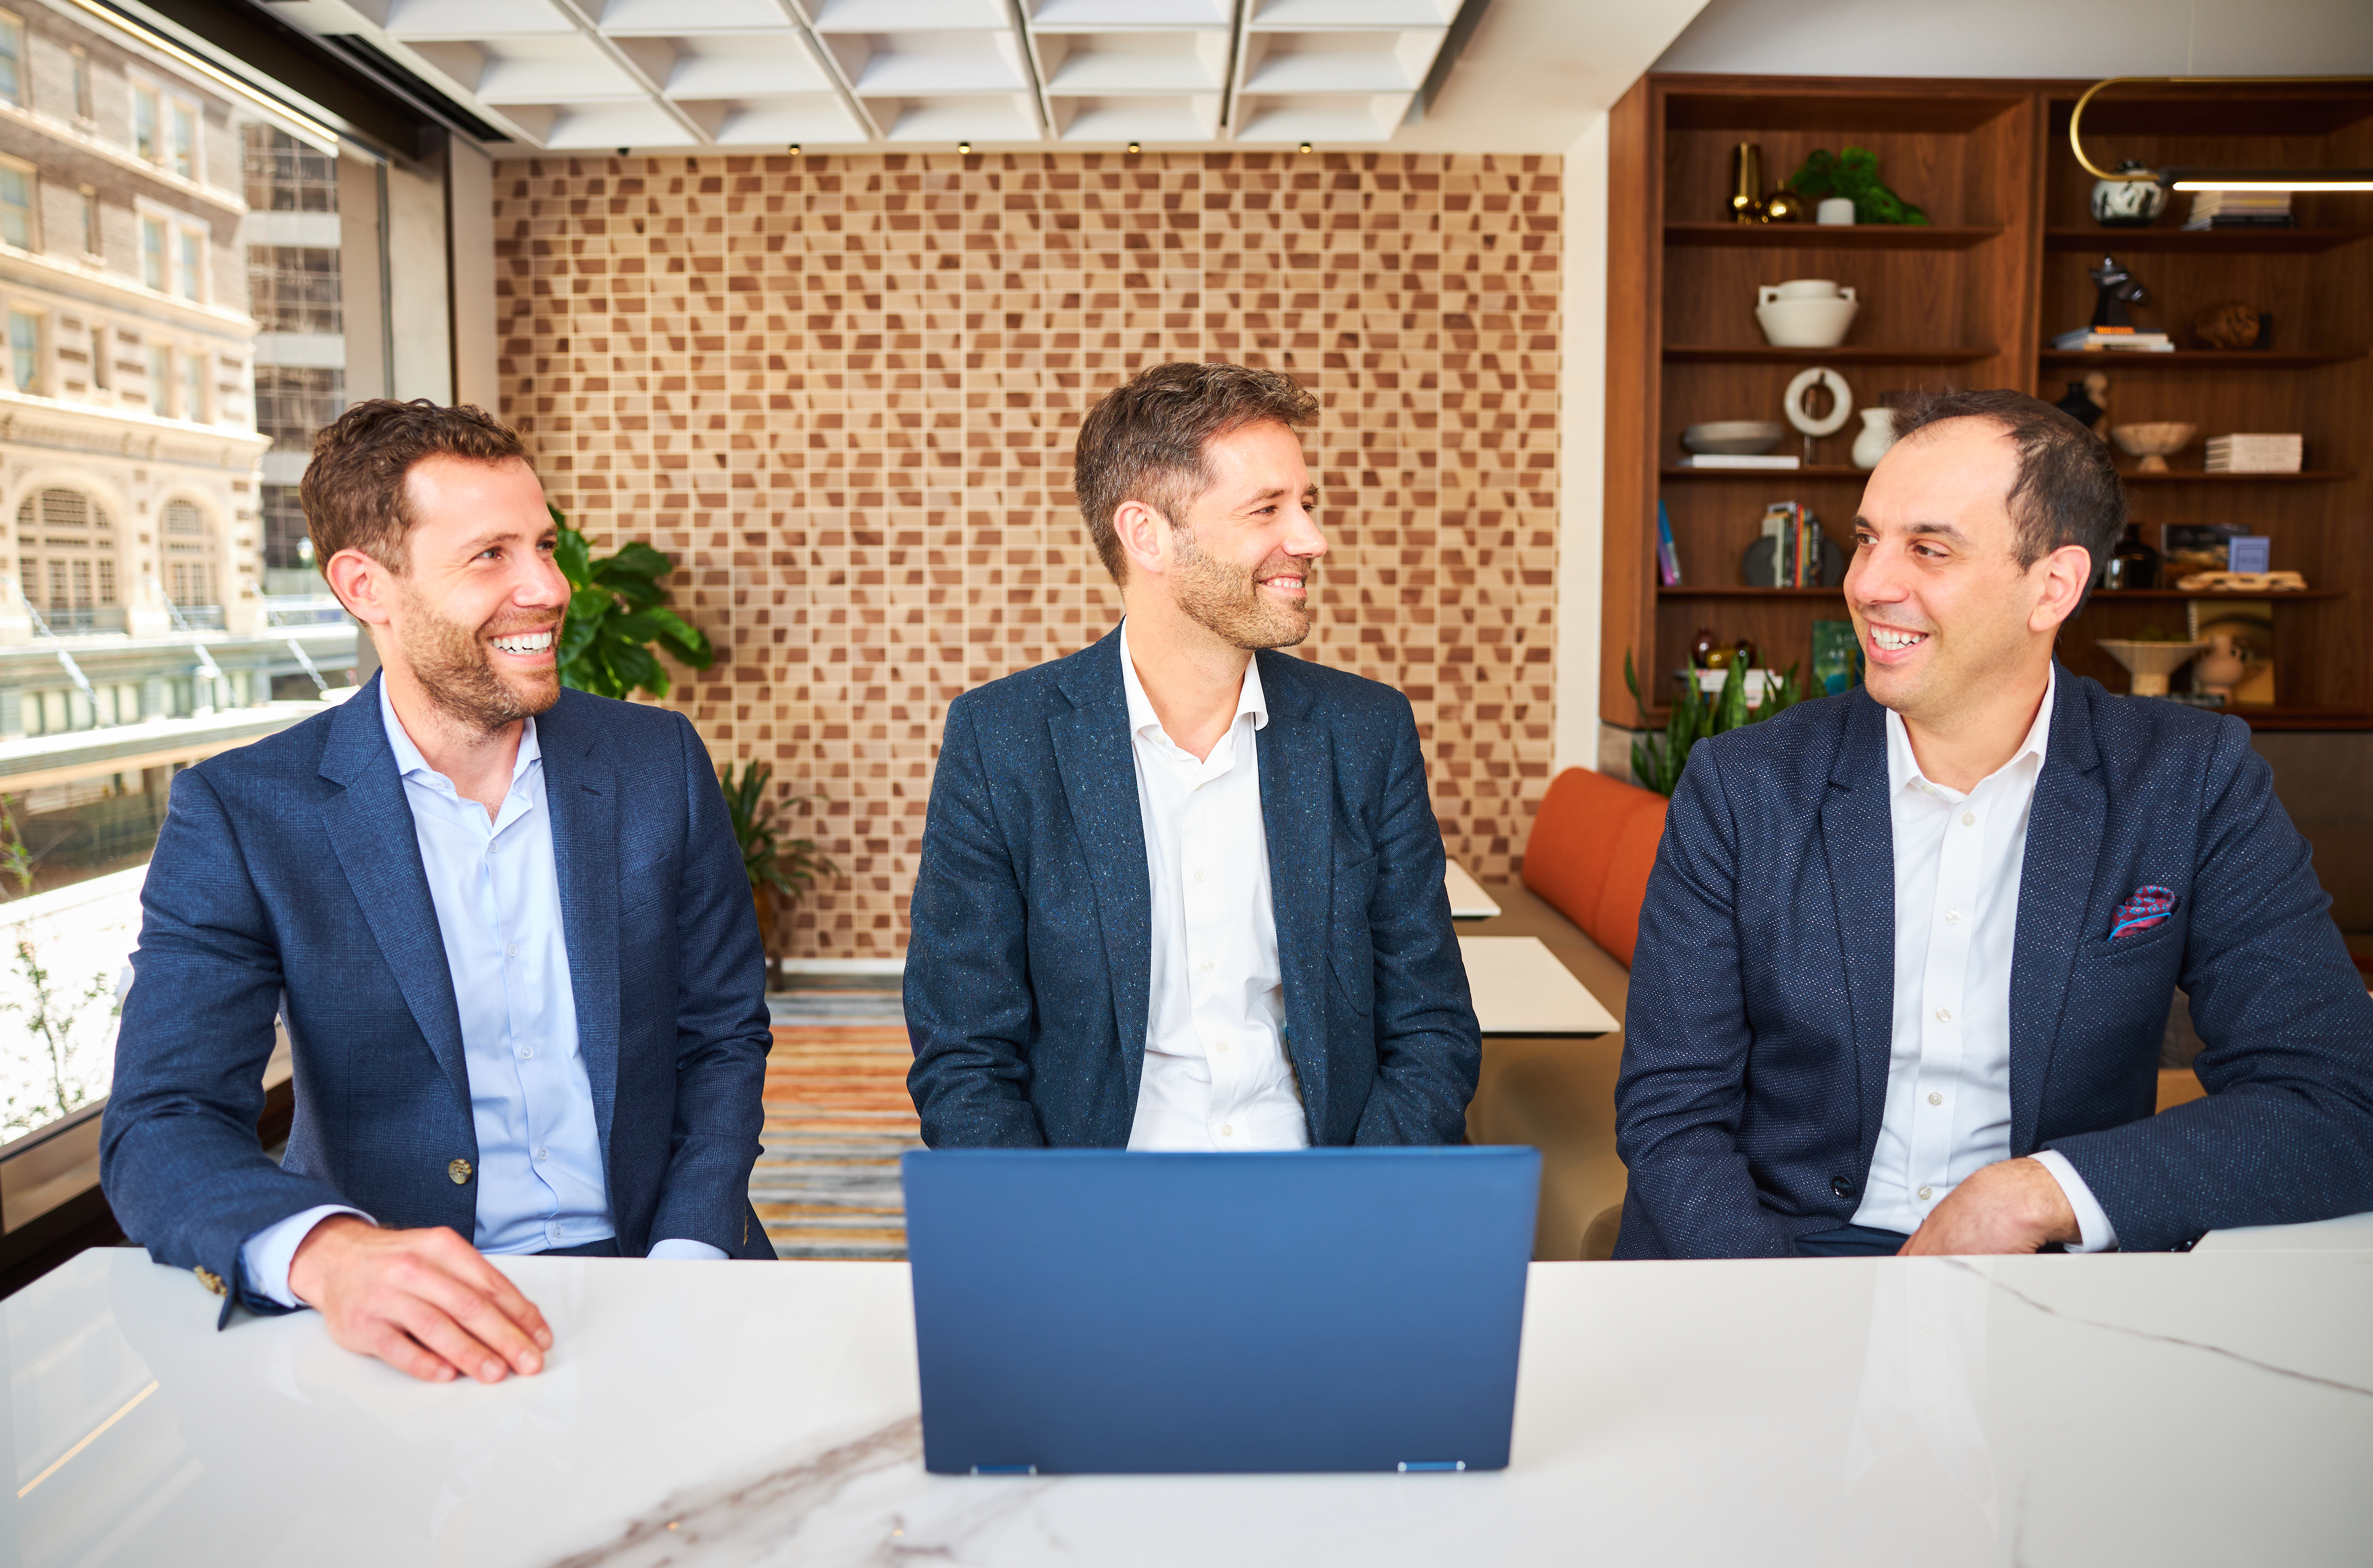 From left to right: Adam Slakman (Vice President Global ESG), Peter Epping (Global Head of ESG), and Mike Izzo (Vice President Carbon Strategy)